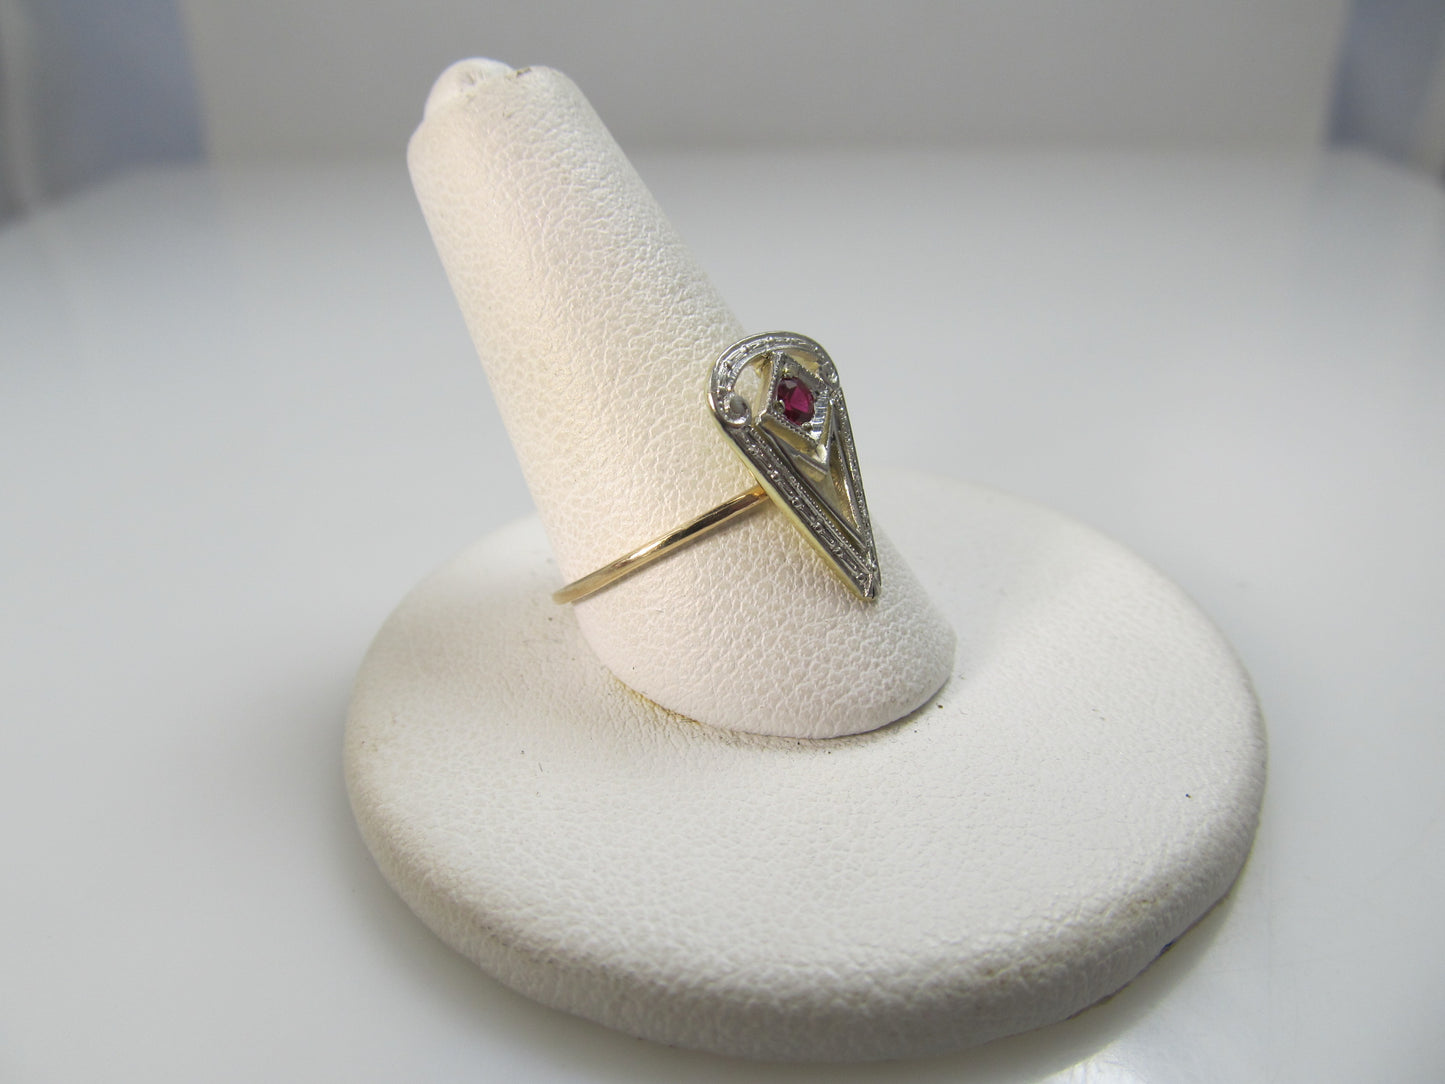 14k white and yellow gold filigree ring with a ruby, circa 1920